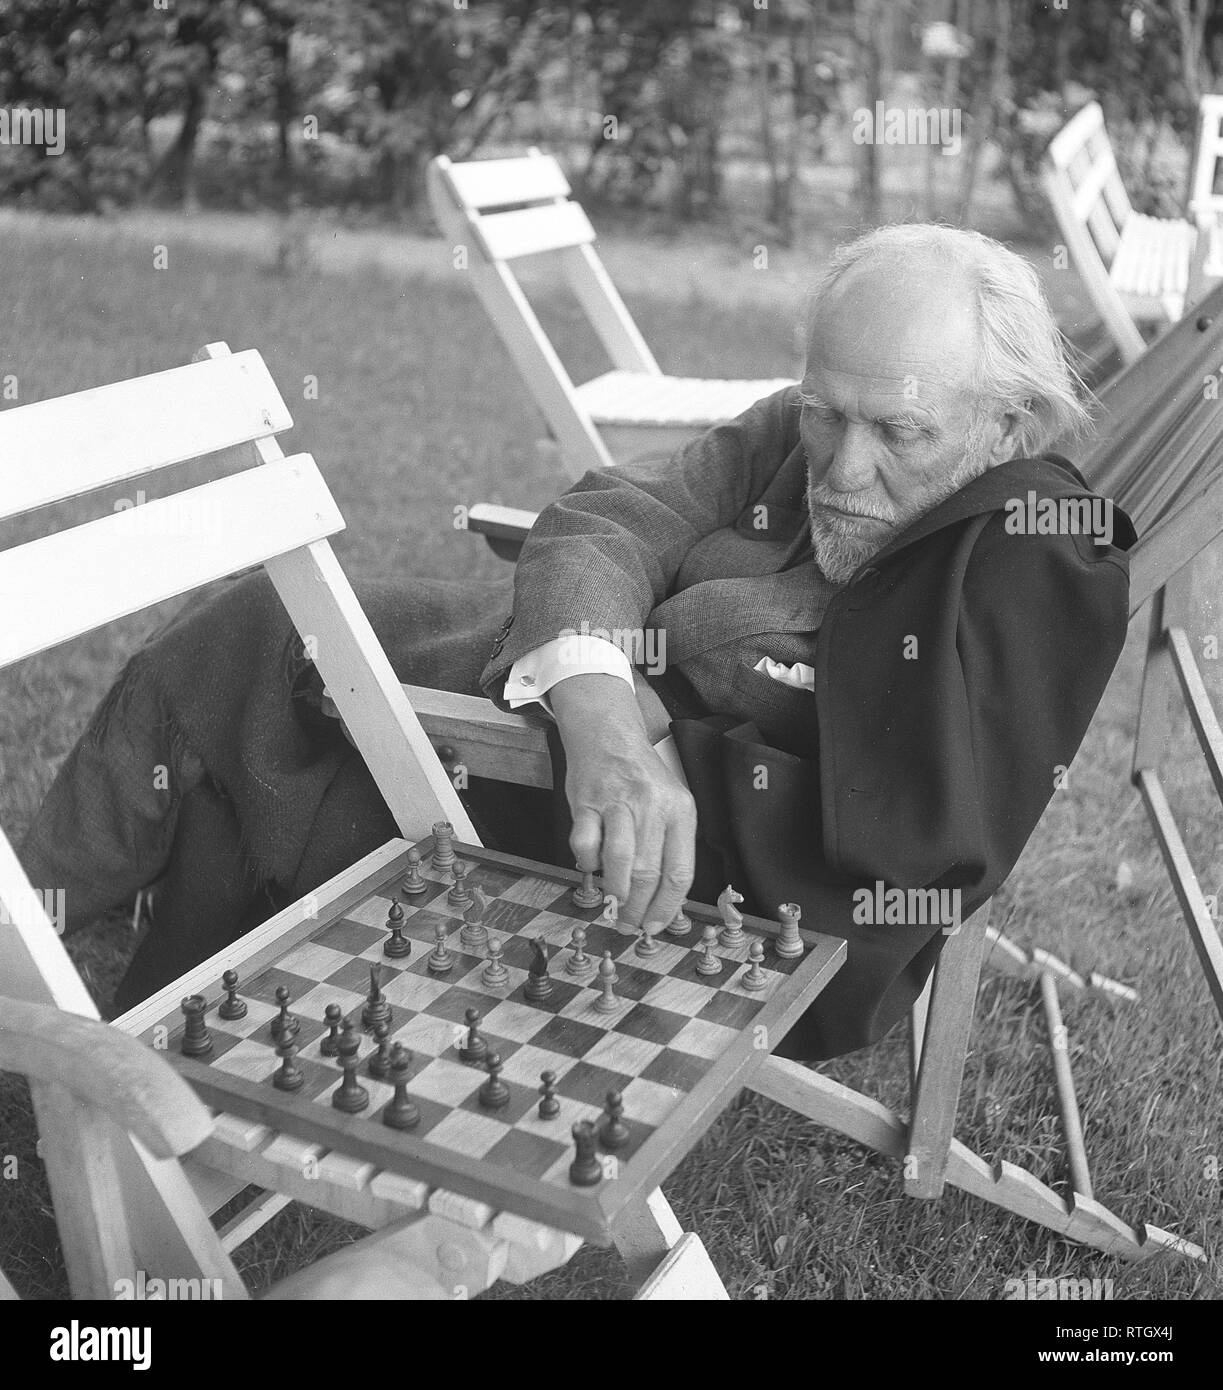 Chess player in the 1950s. An elderly man in an comfortable garden chair is playing chess with someone, and makes a move on the chess board. Photo Kristoffersson Ref BE21-9. Sweden 1952 Stock Photo